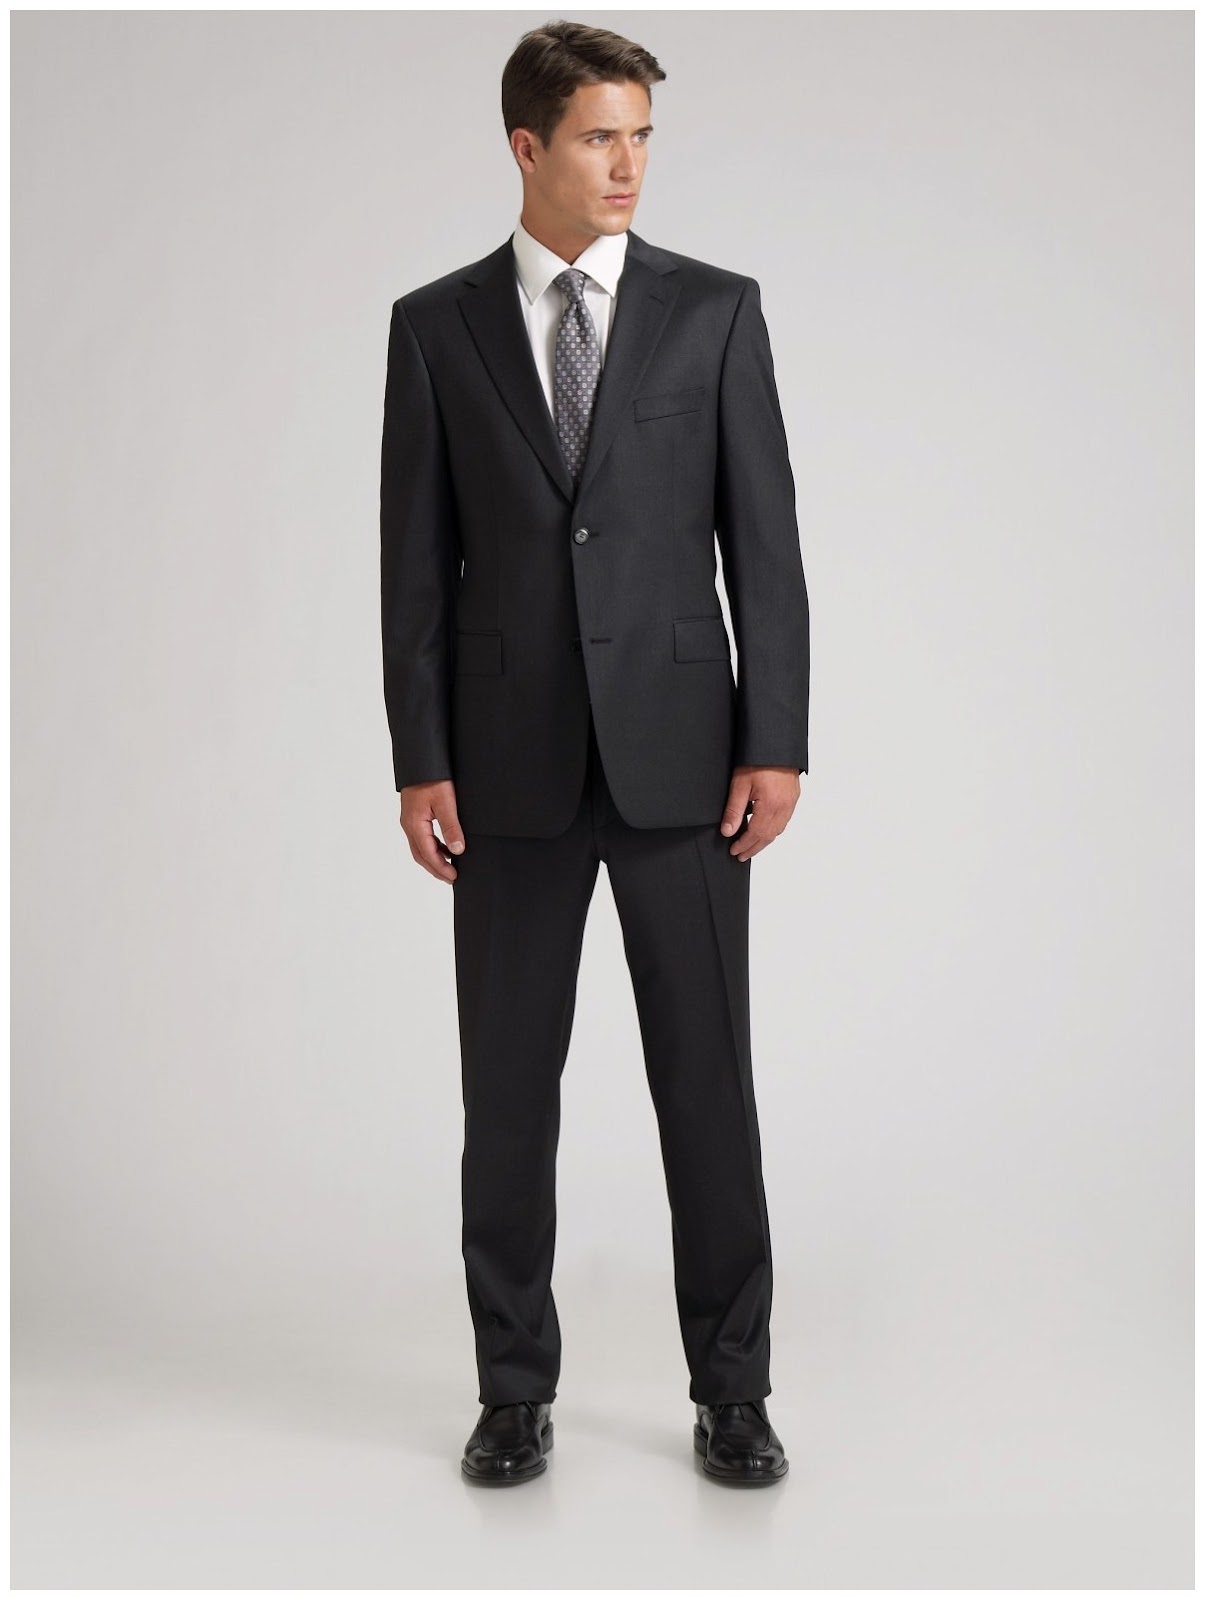 Something about Hugo Boss suit ~ Design Suits